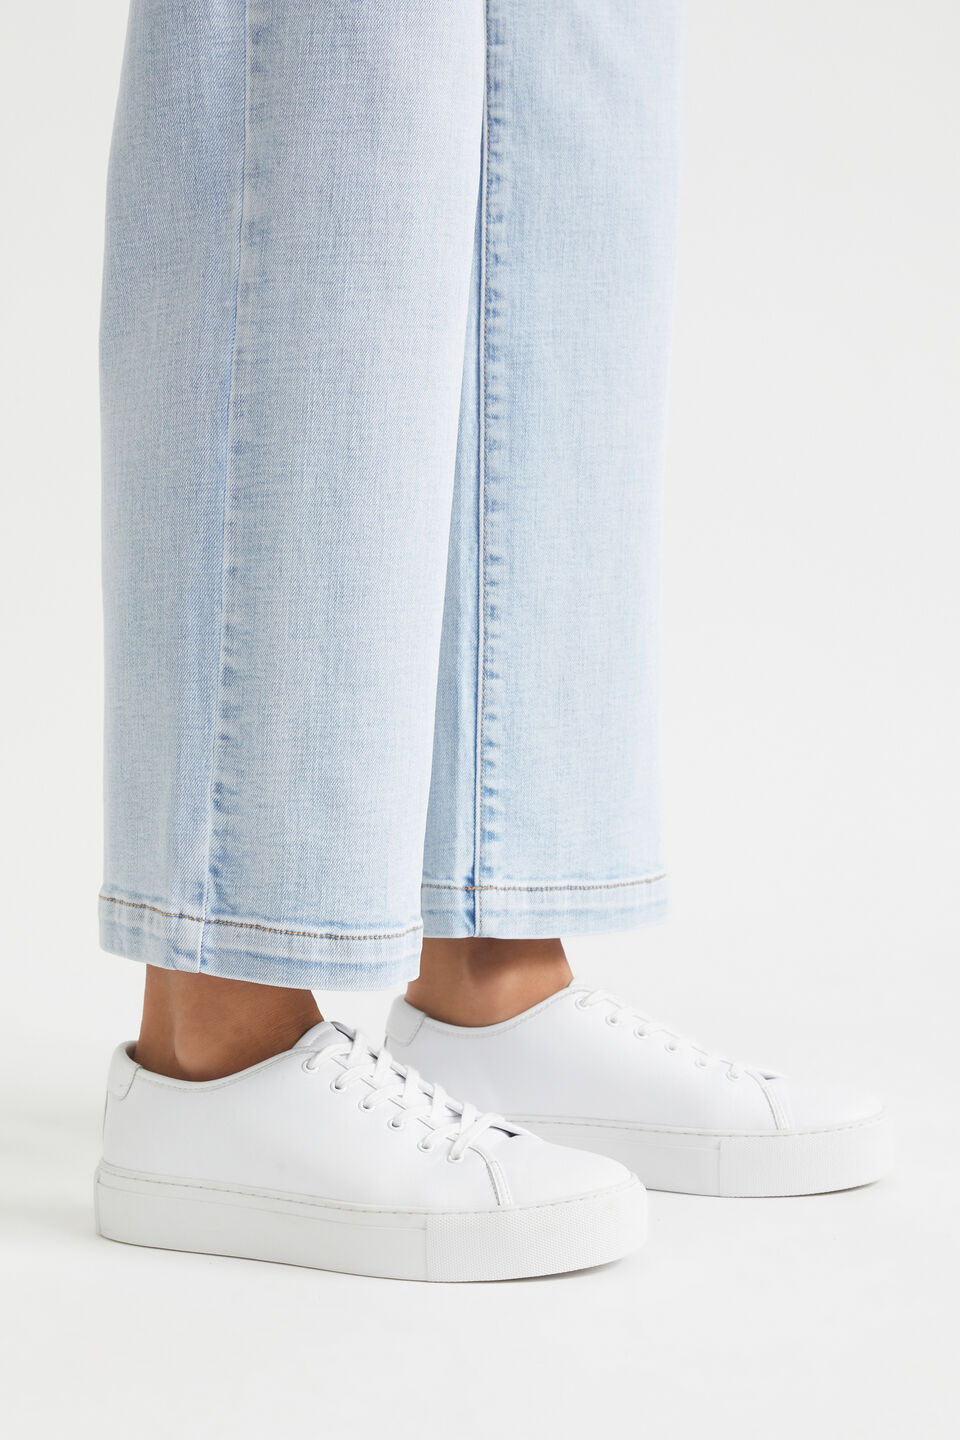 Holland Leather Sneaker  White